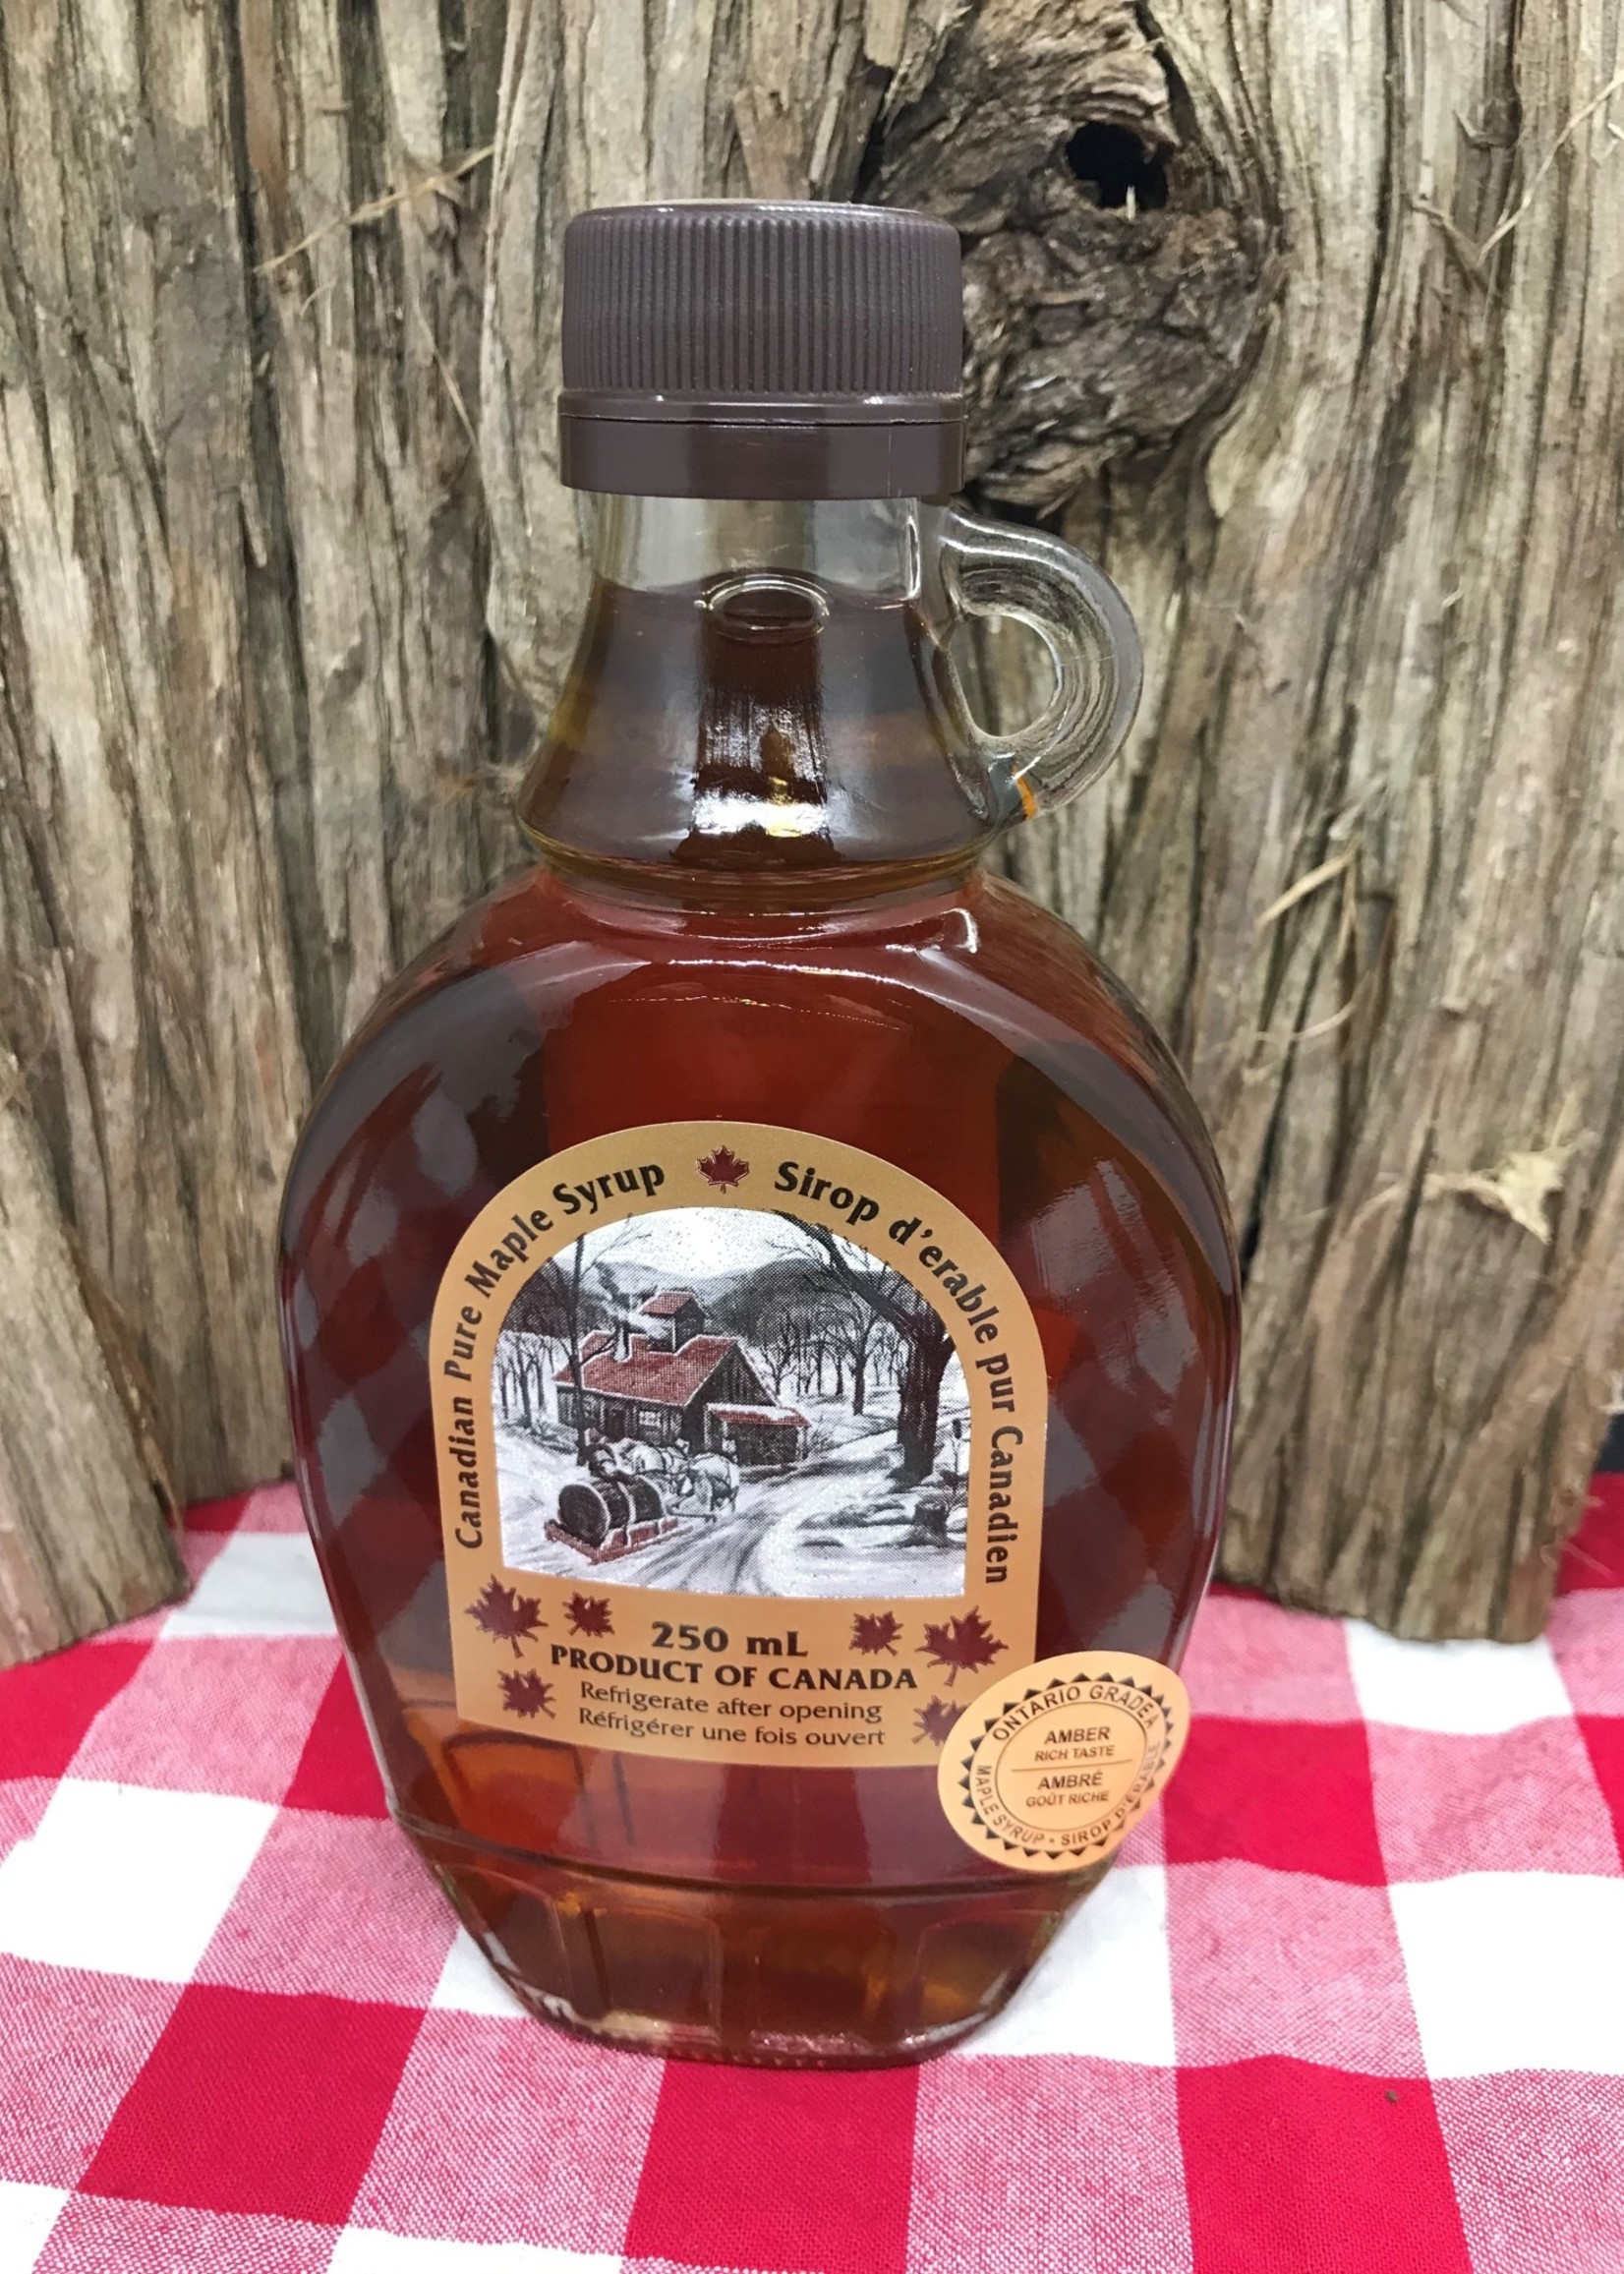 Ken Green Maple Syrup